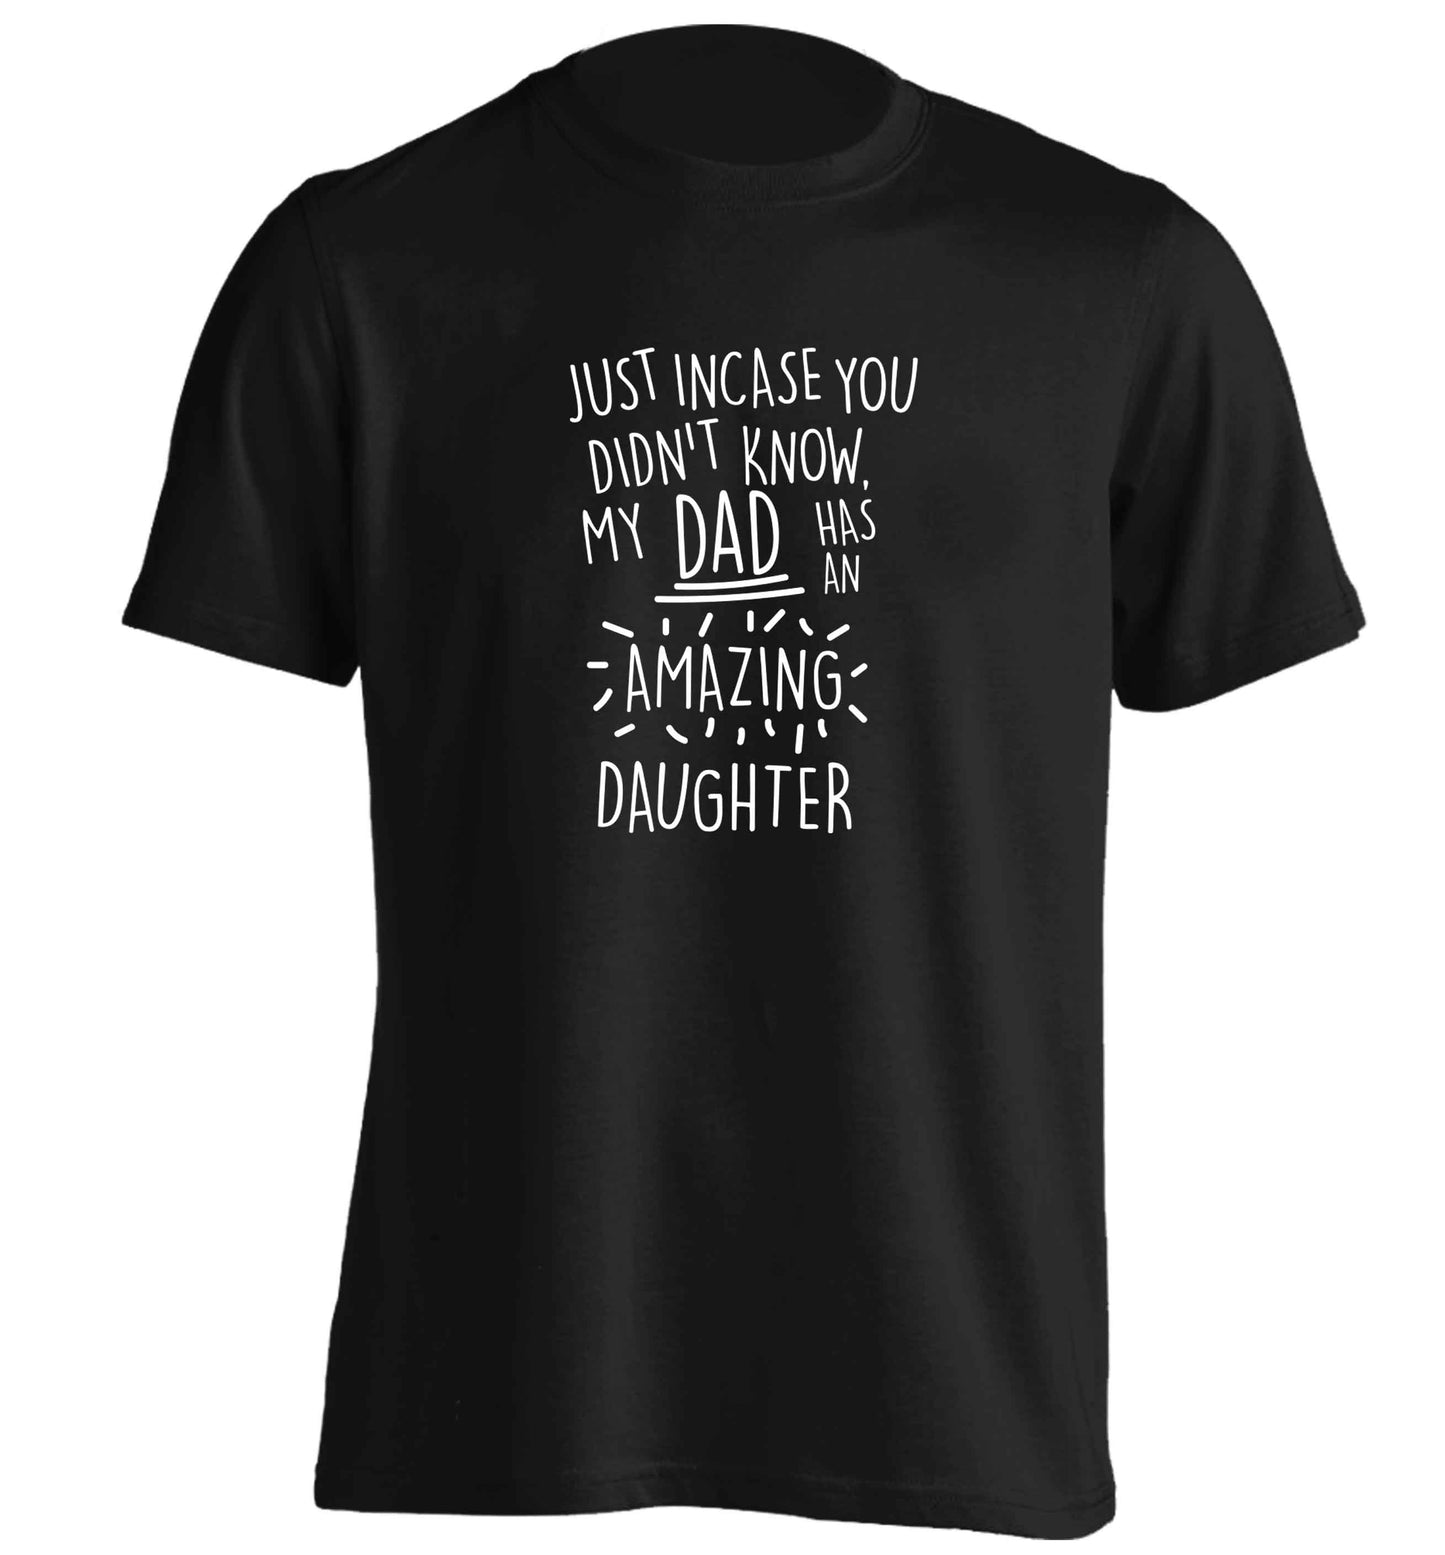 Just incase you didn't know my dad has an amazing daughter adults unisex black Tshirt 2XL